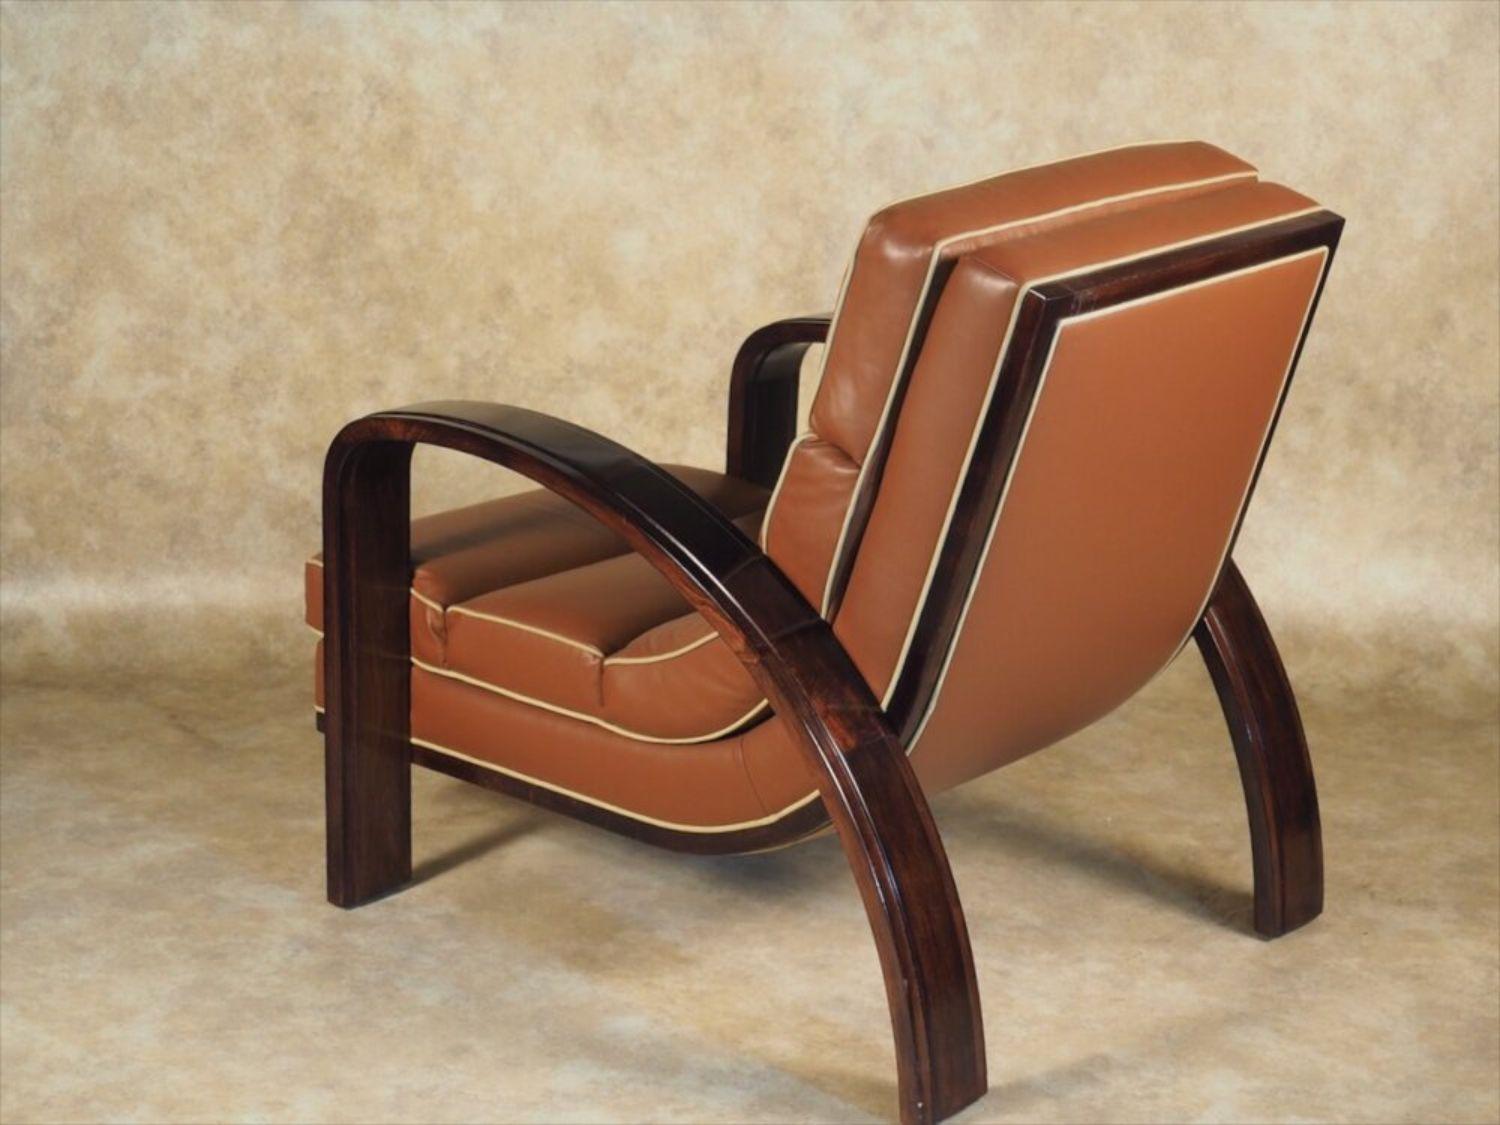 Beech Lucie Renaudot, Large-Scale Modernist Armchair For Sale